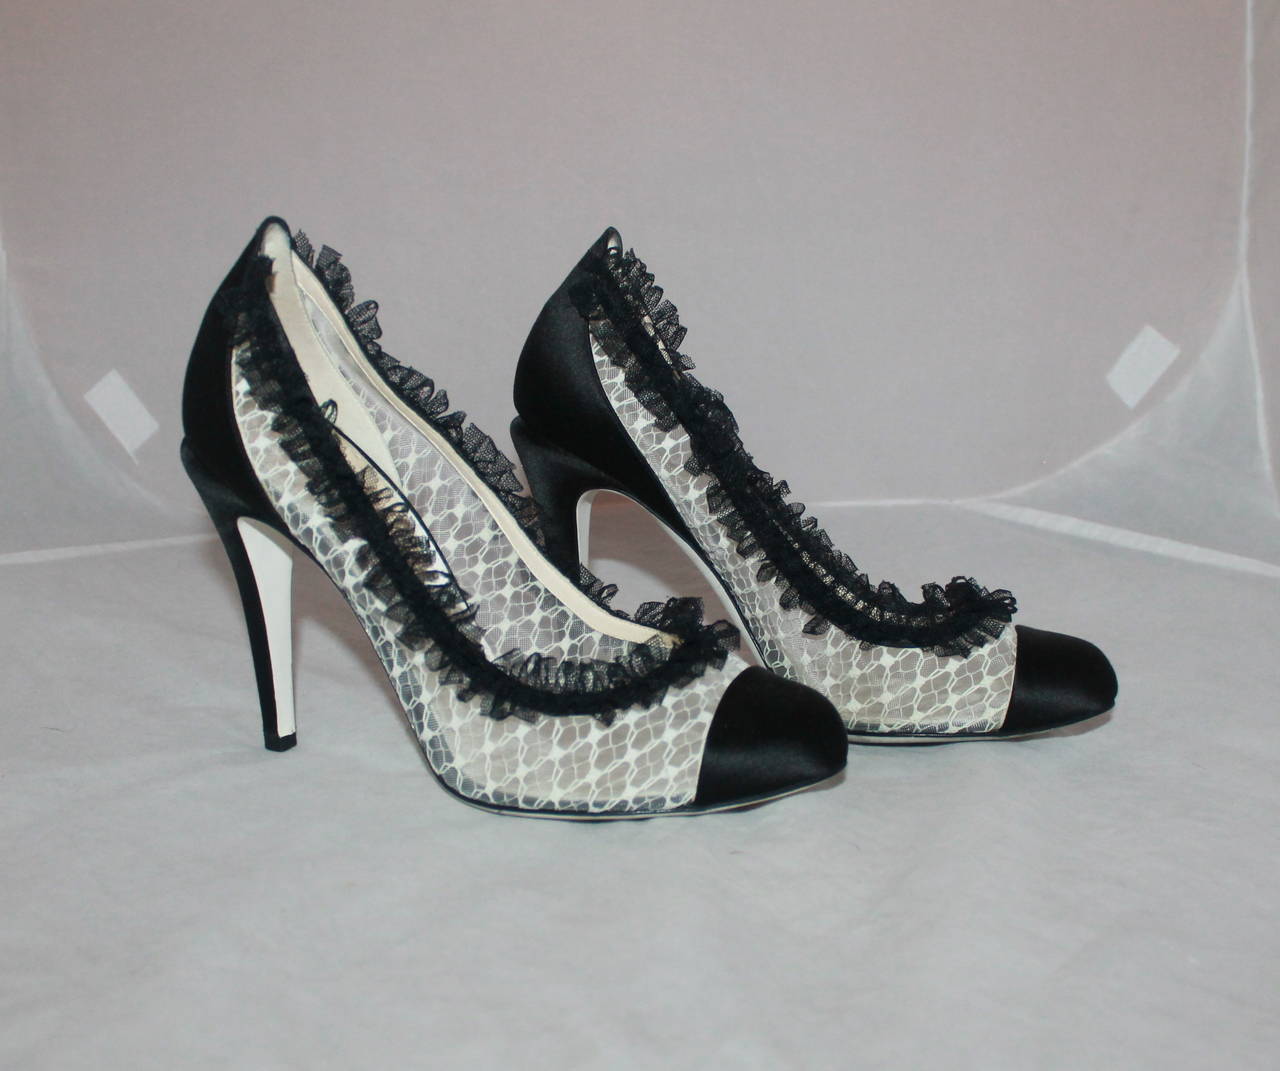 Chanel Ivory & Black Lace Pumps with Ruffle Trim - 40. These pumps are in excellent condition and have moderate wear on the bottom shown in image 5. The peep-toe and the back heel are satin and have a studded 